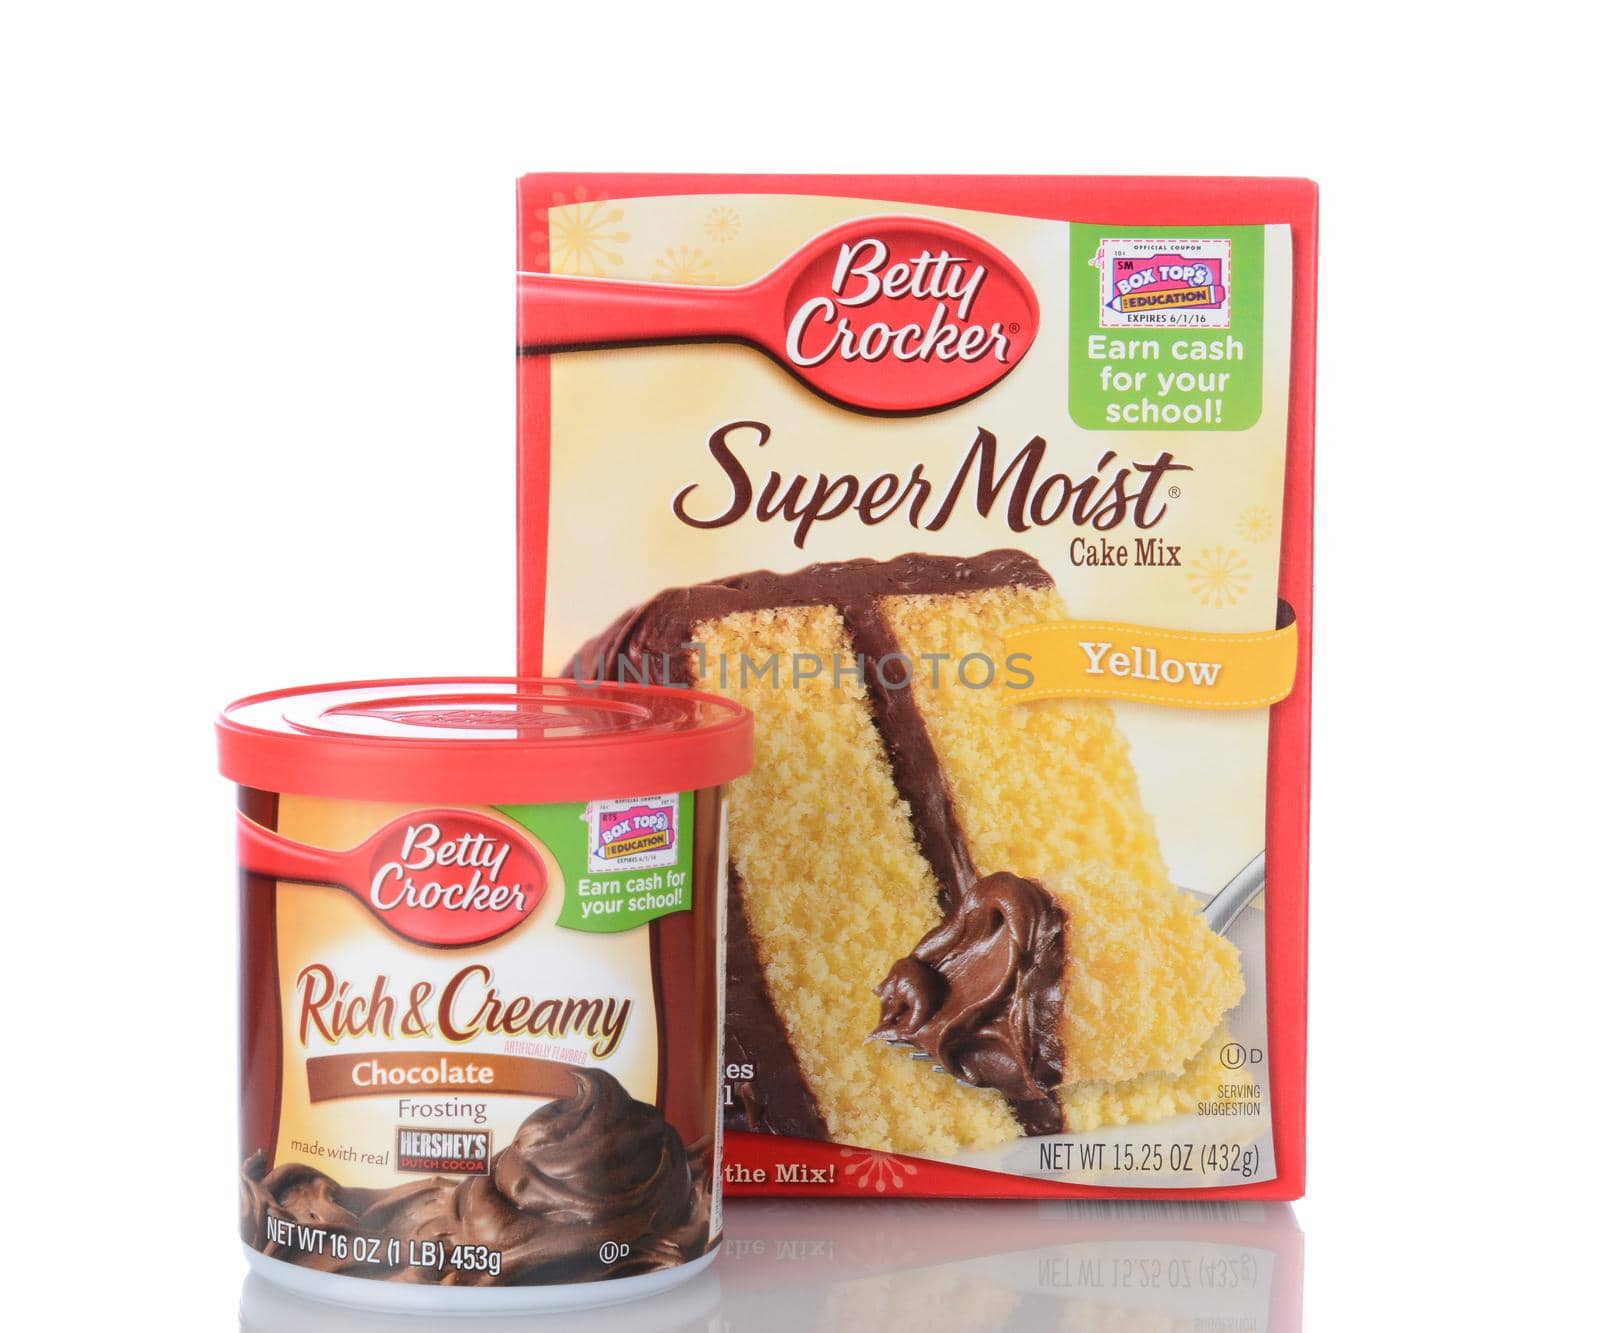 IRVINE, CA - January 05, 2014: Betty Crocker Super Moist Cake Mix and Frosting. One box of Yellow Cake Mix and a can of ready to spread Rich & Creamy Chocolate Frosting.